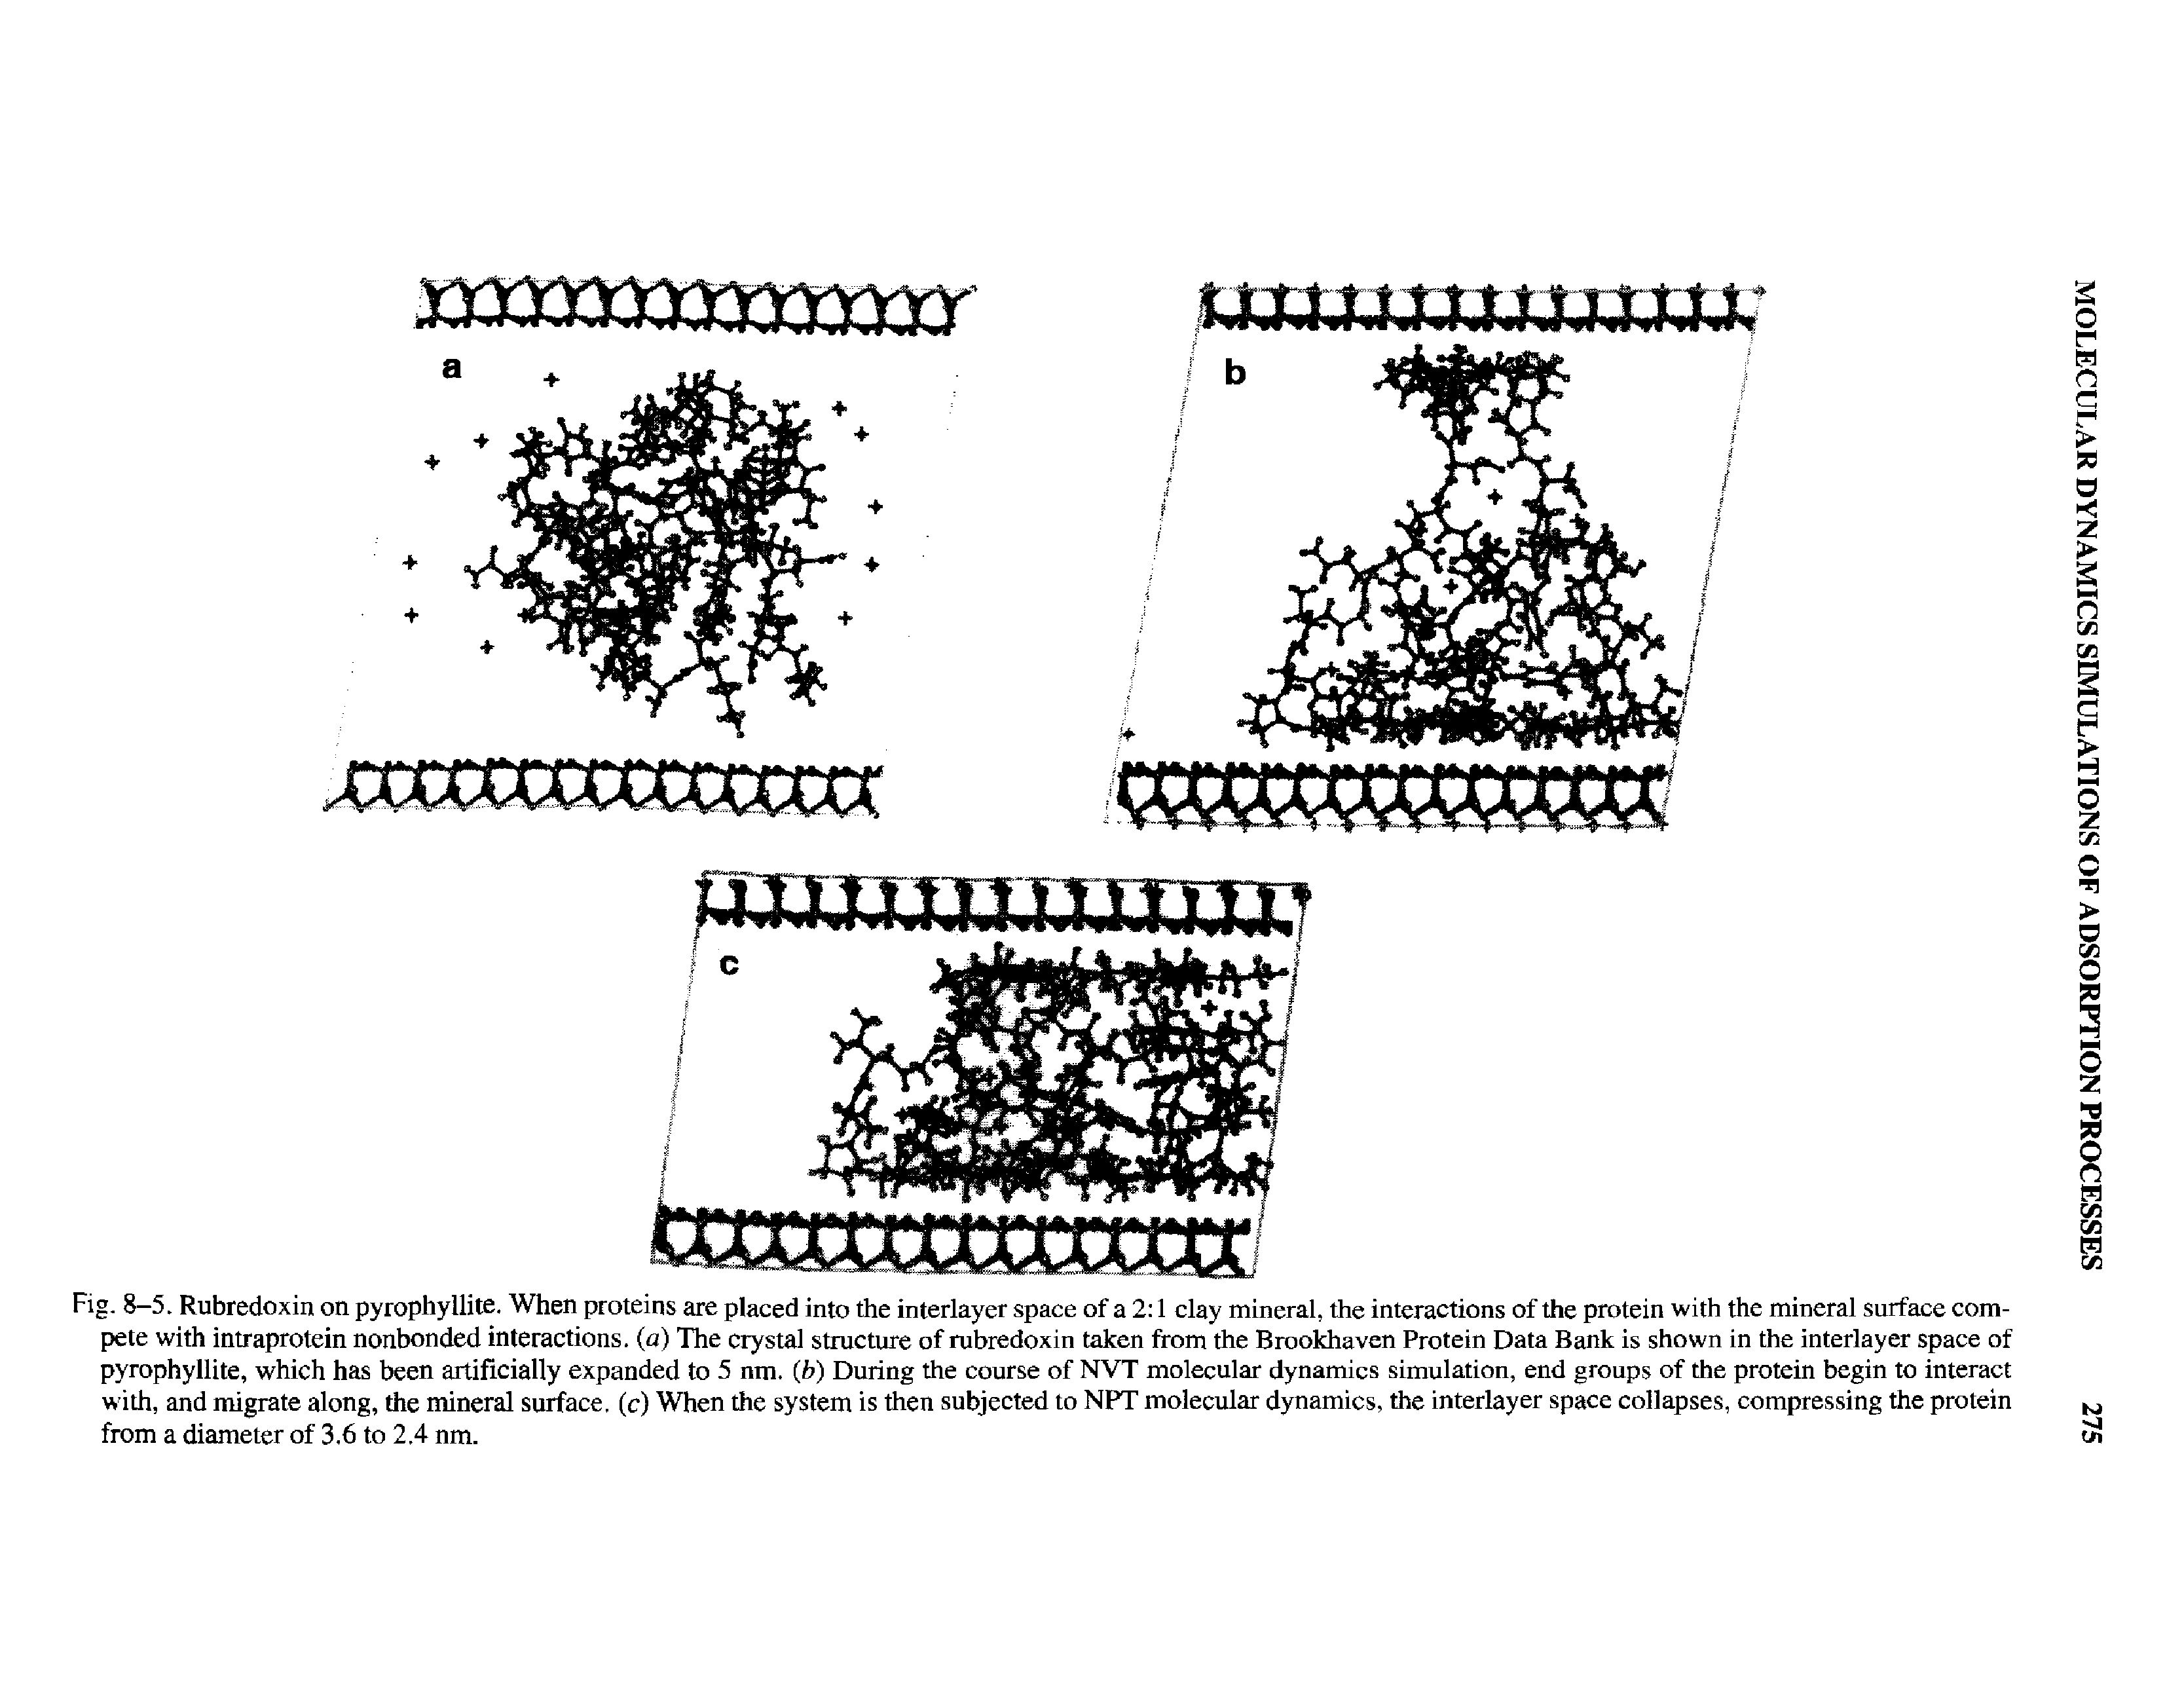 Fig. 8-5. Rubredoxin on pyrophyllite. When proteins are placed into the interlayer space of a 2 1 clay mineral, the interactions of the protein with the mineral surface compete with intraprotein nonbonded interactions, (a) The crystal structure of rubredoxin taken from the Brookhaven Protein Data Bank is shown in the interlayer space of pyrophyllite, which has been artificially expanded to 5 nm. (b) During the course of NVT molecular dynamics simulation, end groups of the protein begin to interact with, and migrate along, the mineral surface, (c) When the system is then subjected to NPT molecular dynamics, the interlayer space collapses, compressing the protein from a diameter of 3.6 to 2,4 nm.